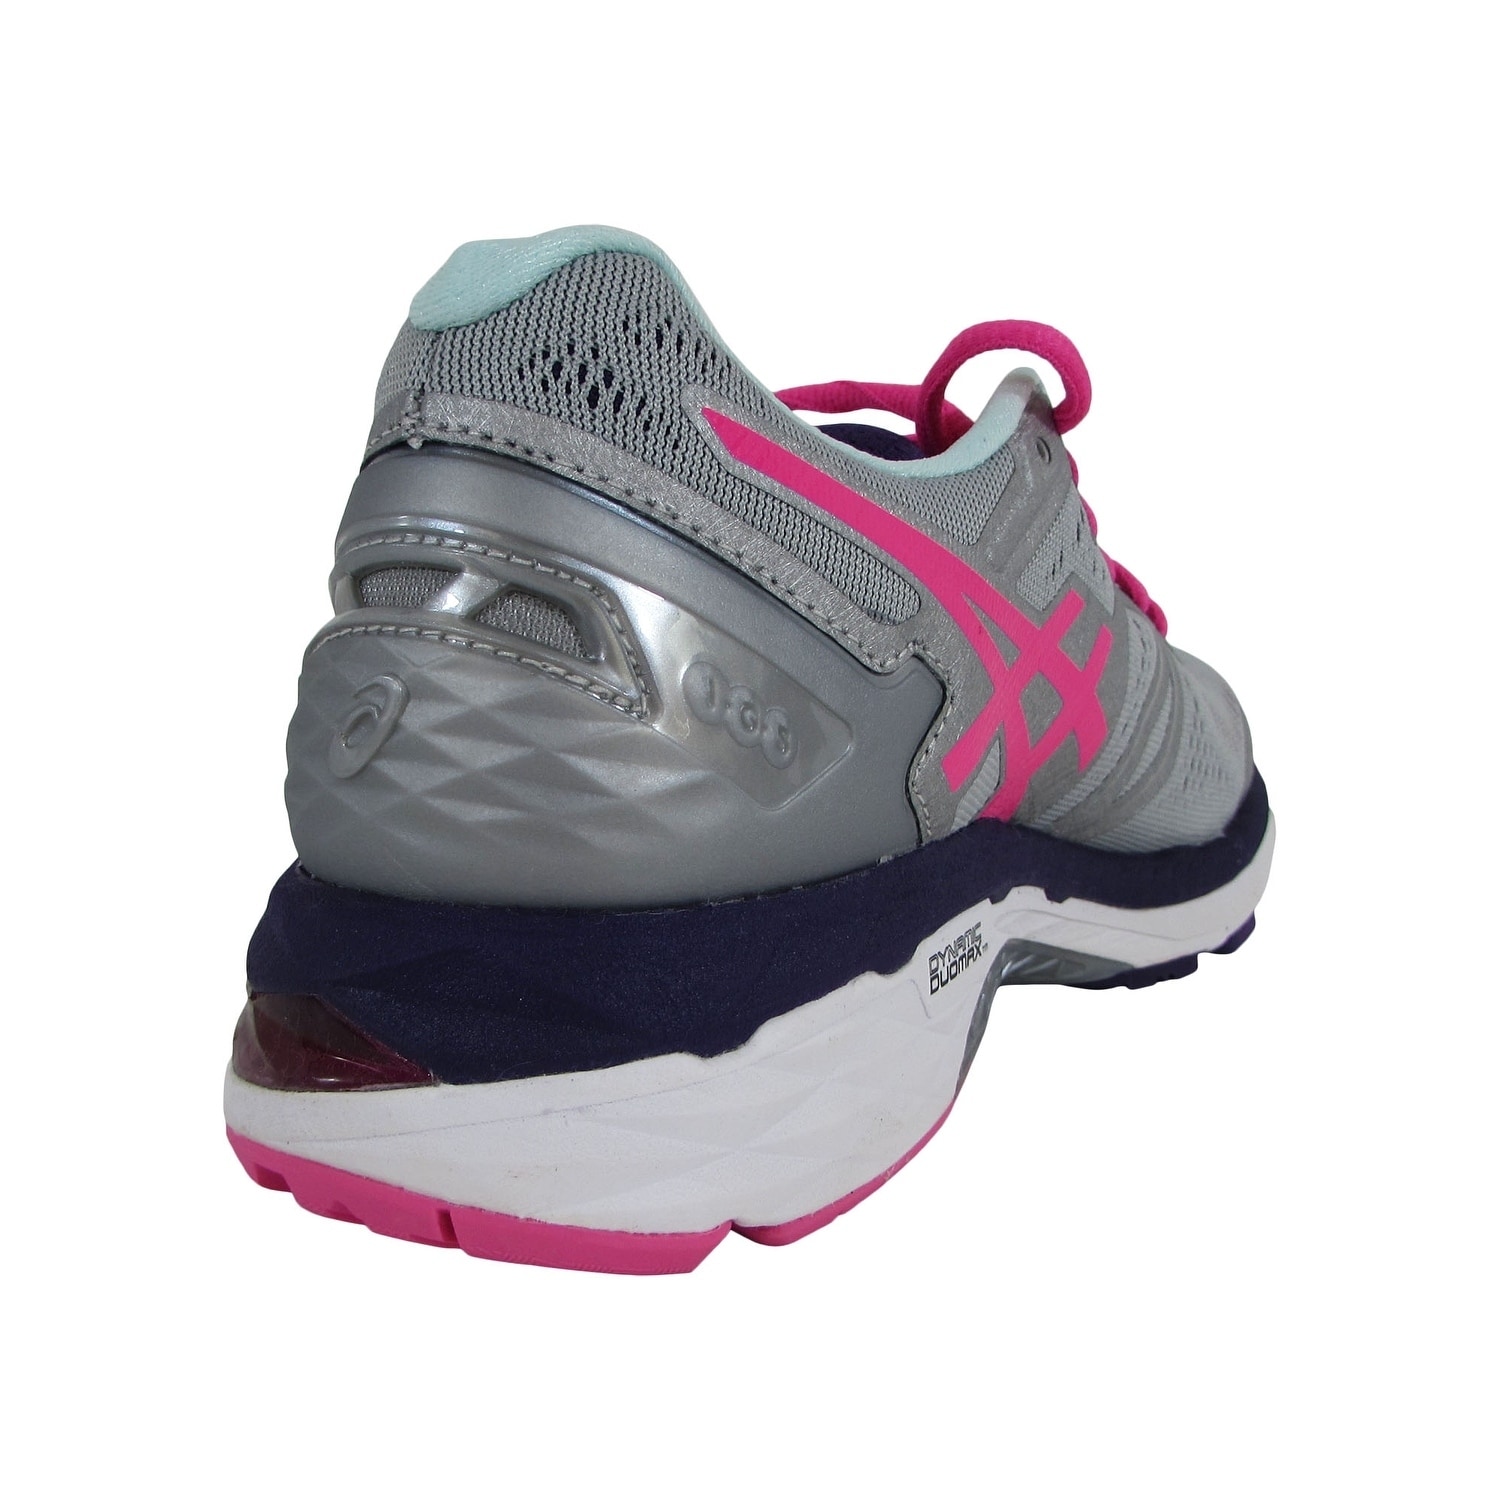 Asics Womens Gel Kayano 23 Running Shoes Silver Pink Glow Purple Overstock Wide 6